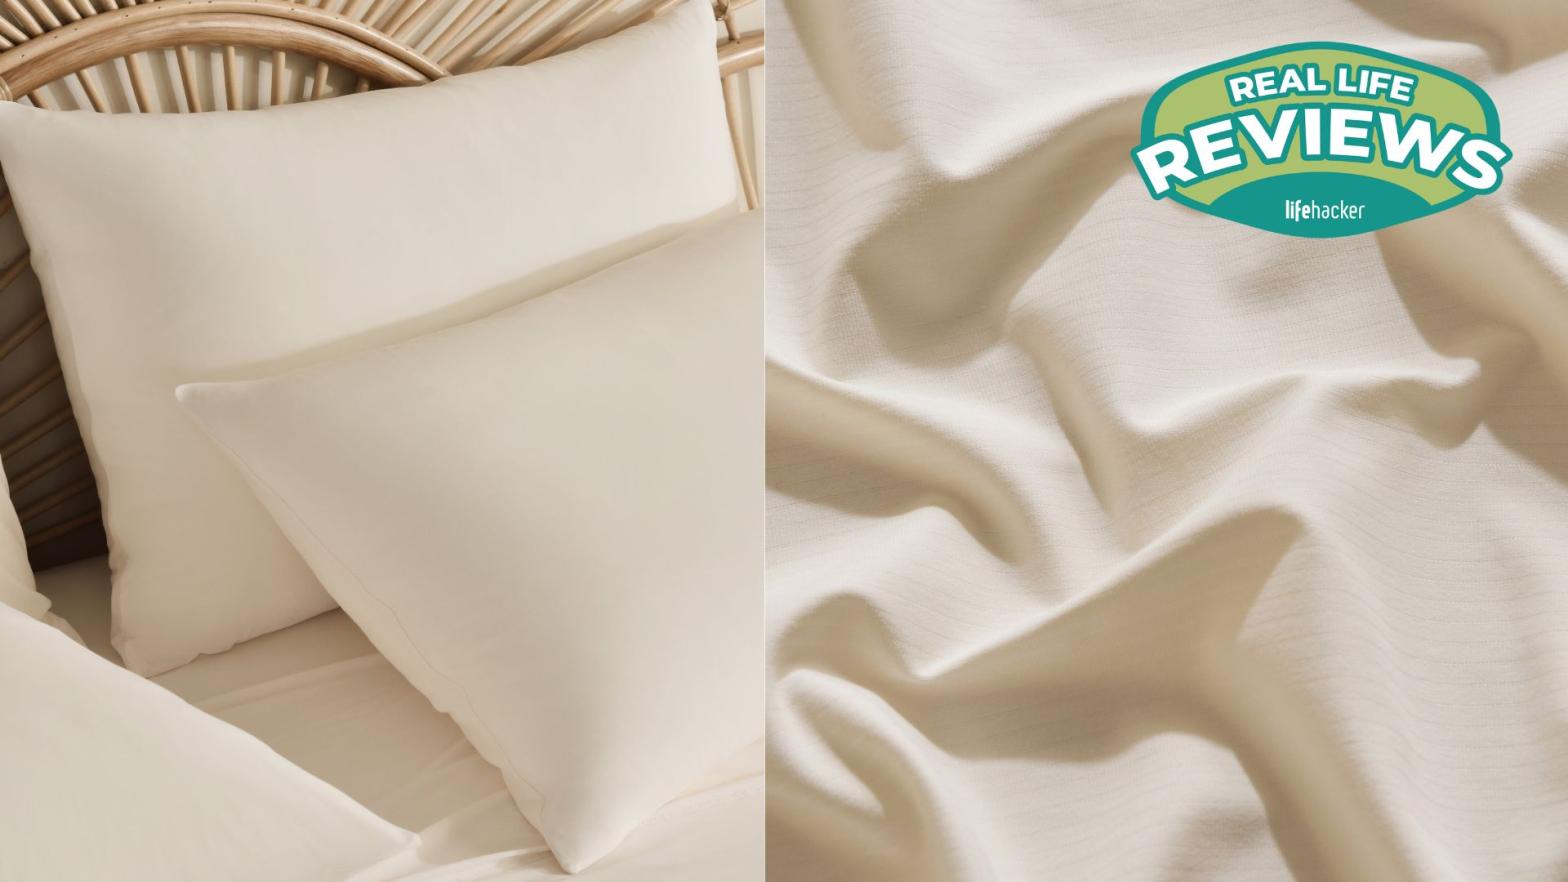 Rest cooling sheet review